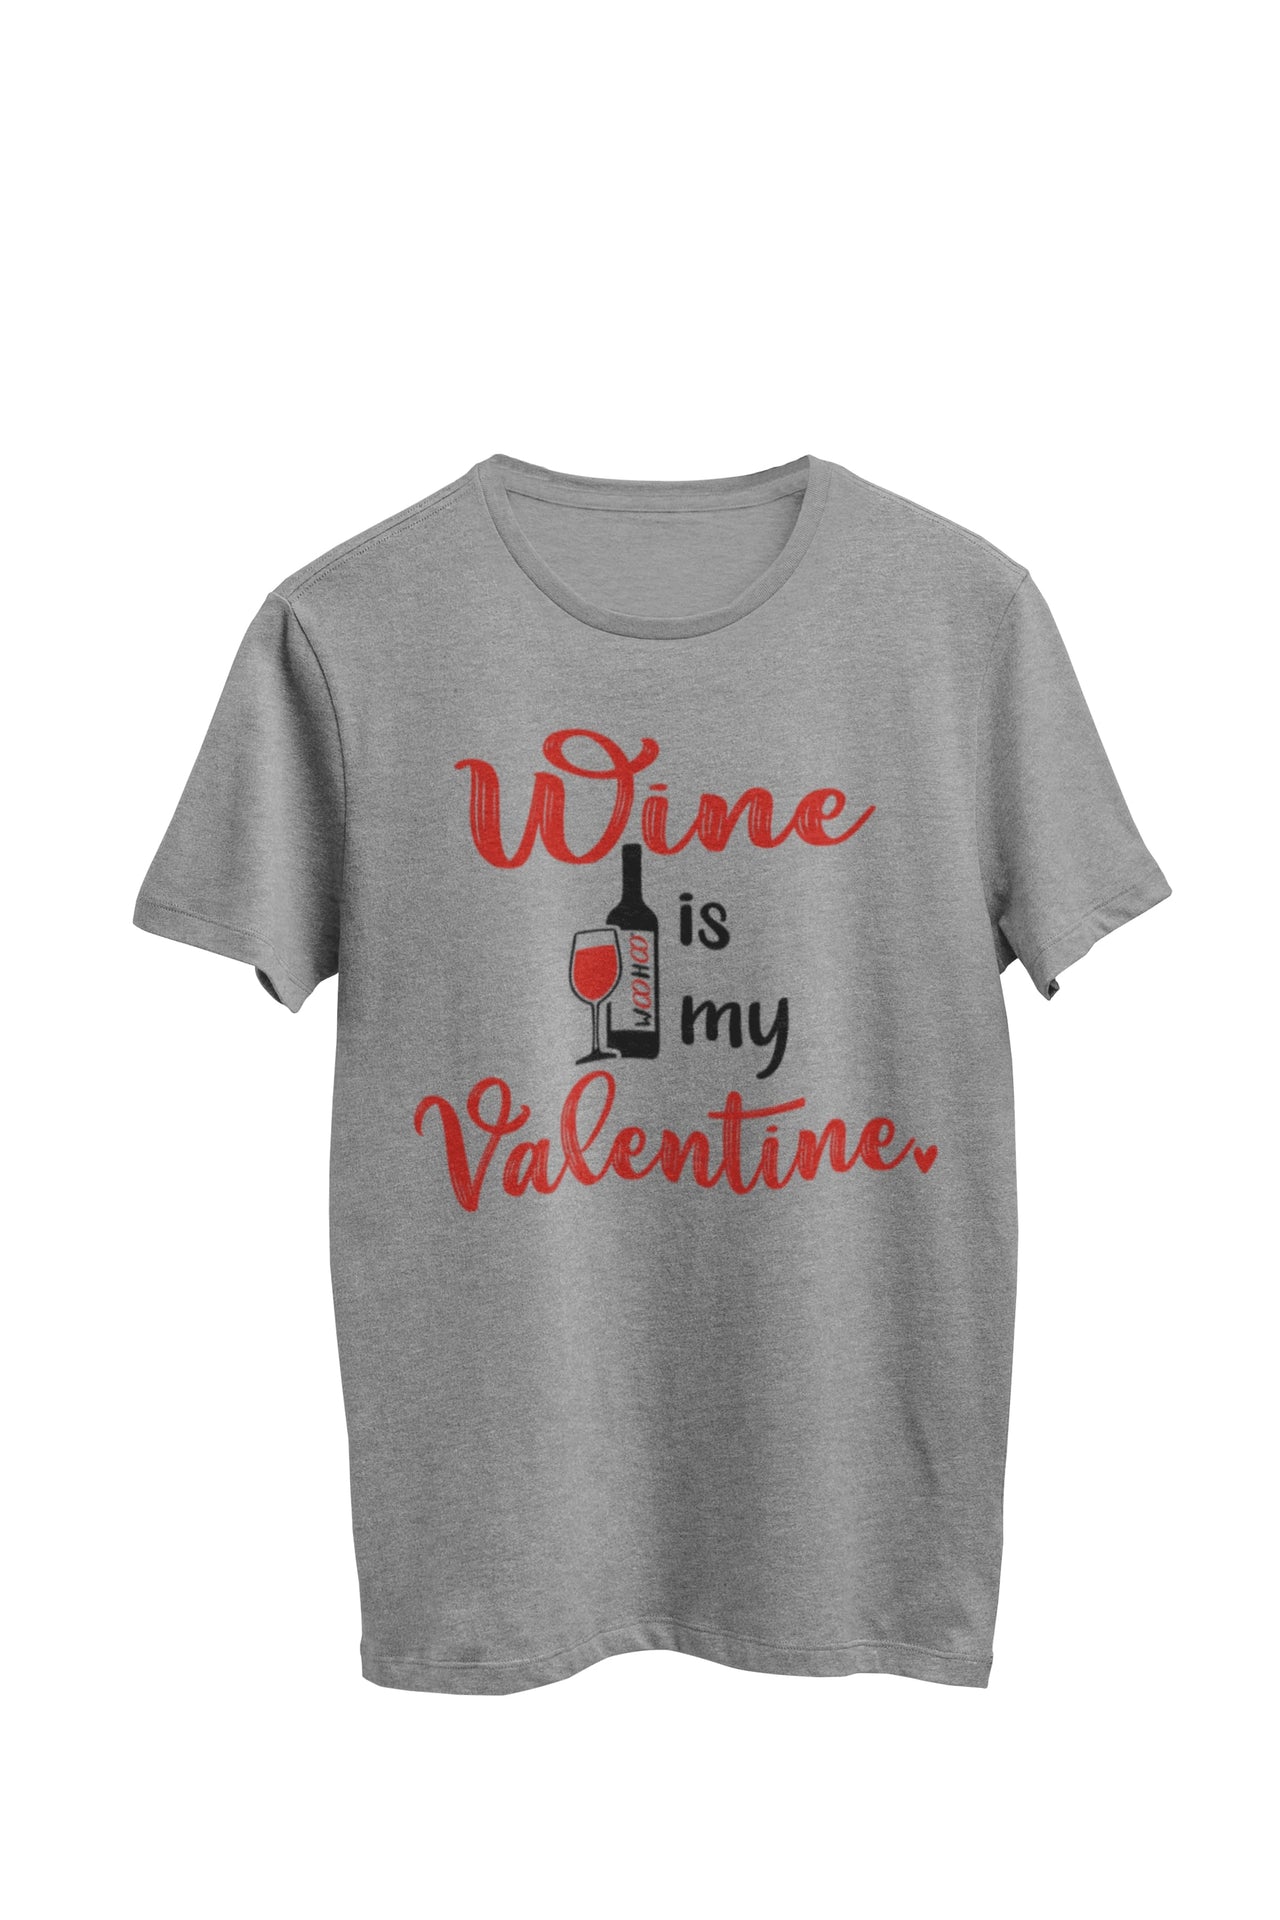 Gray Heather Unisex T-shirt featuring the Woohoo wine bottle with a wine glass, and the text 'Wine is my valentine.' Designed by WooHoo Apparel.